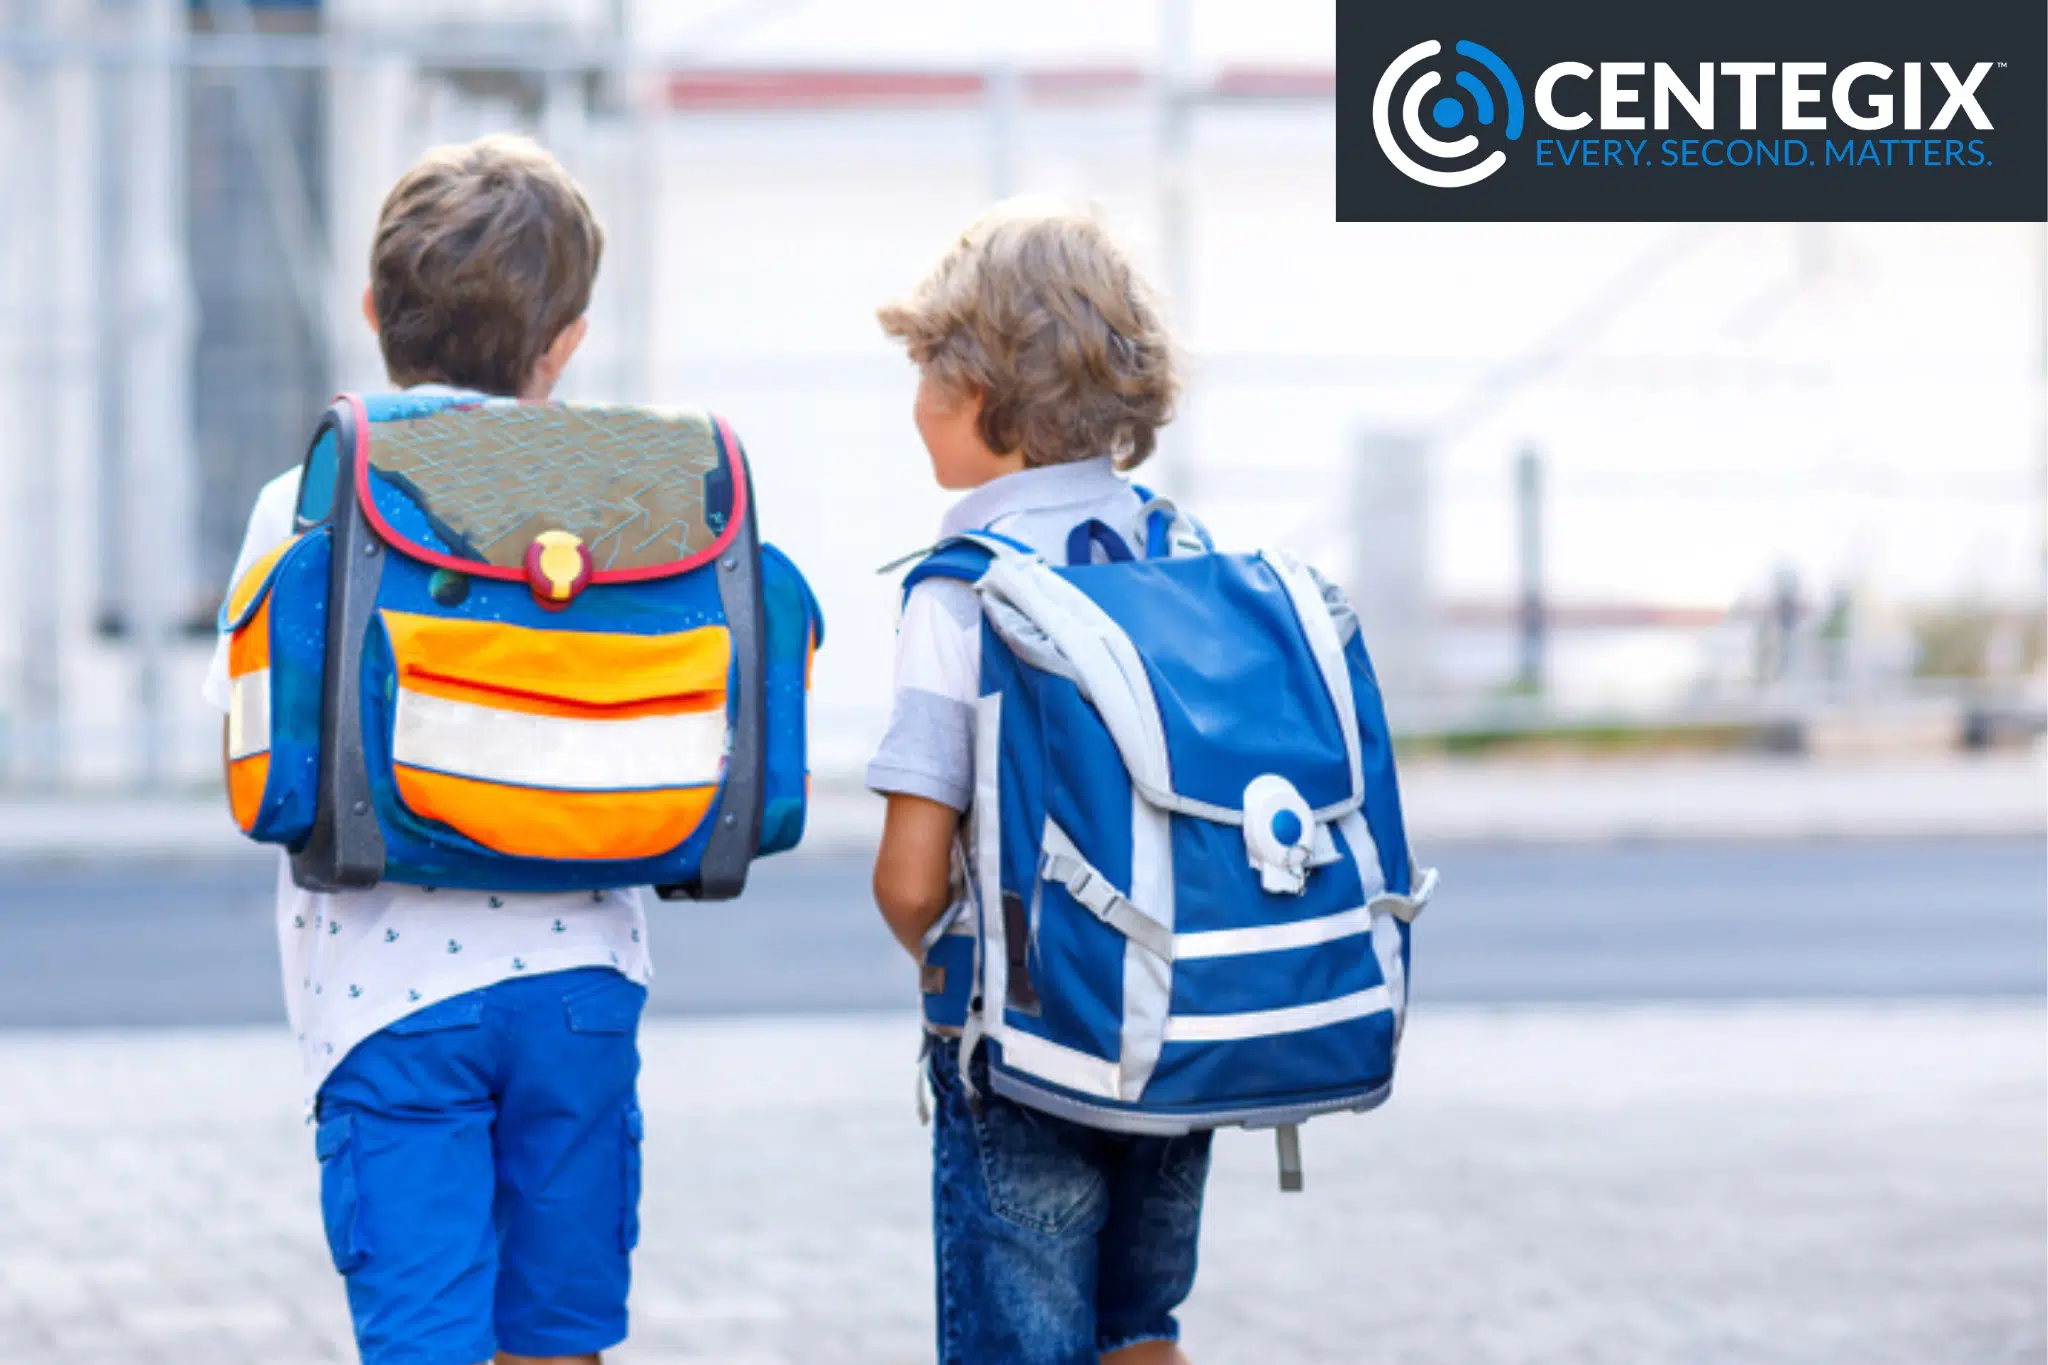 Two young boys wearing backpacks walking outside, safer because of CENTEGIX wearable emergency button